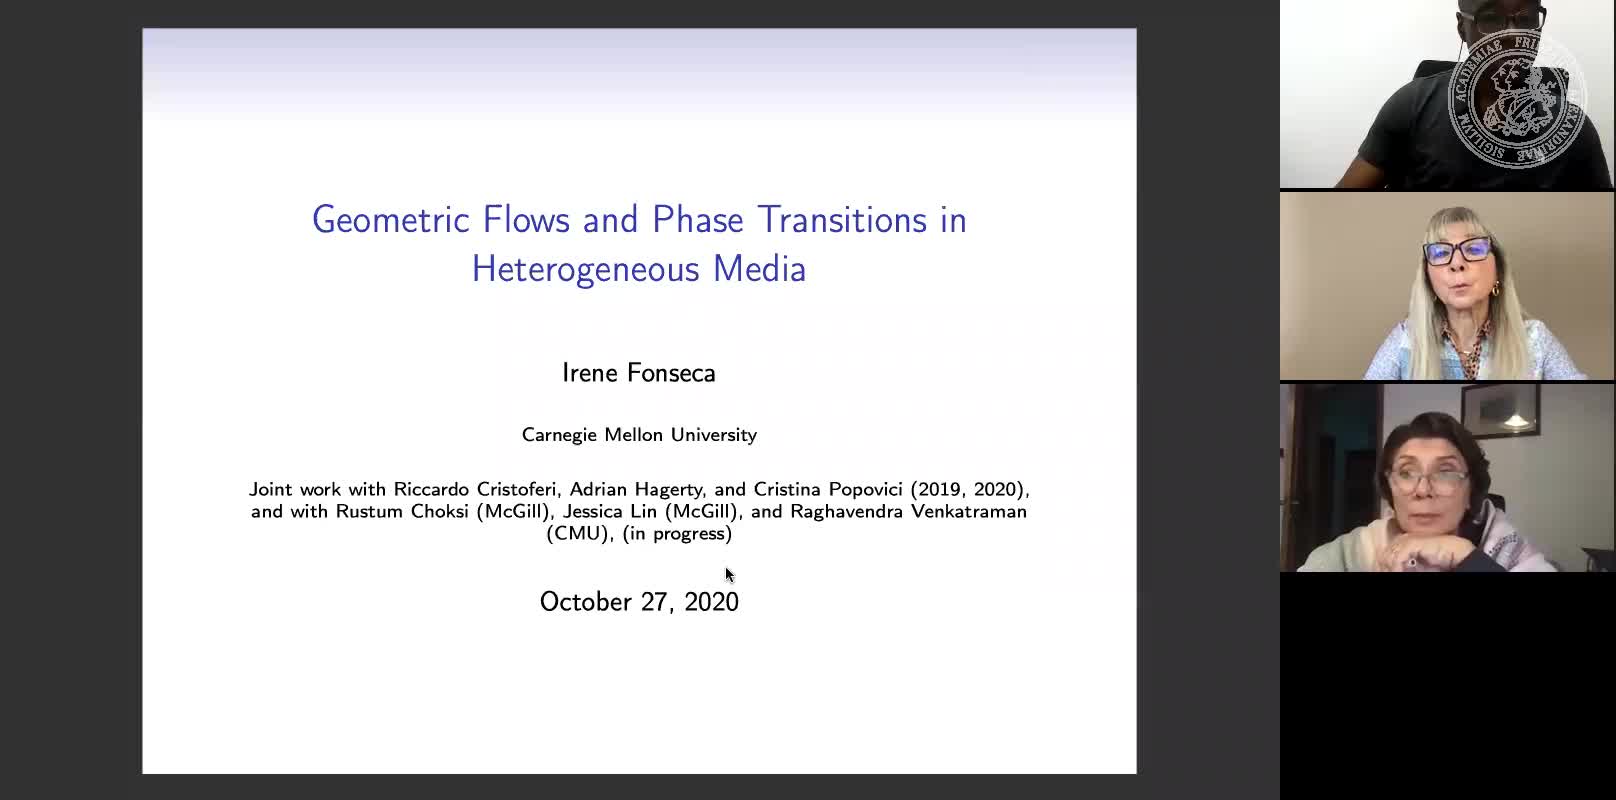 Geometric Flows and Phase Transitions in Heterogeneous Media (Irene Fonseca, Carnegie Mellon University) preview image